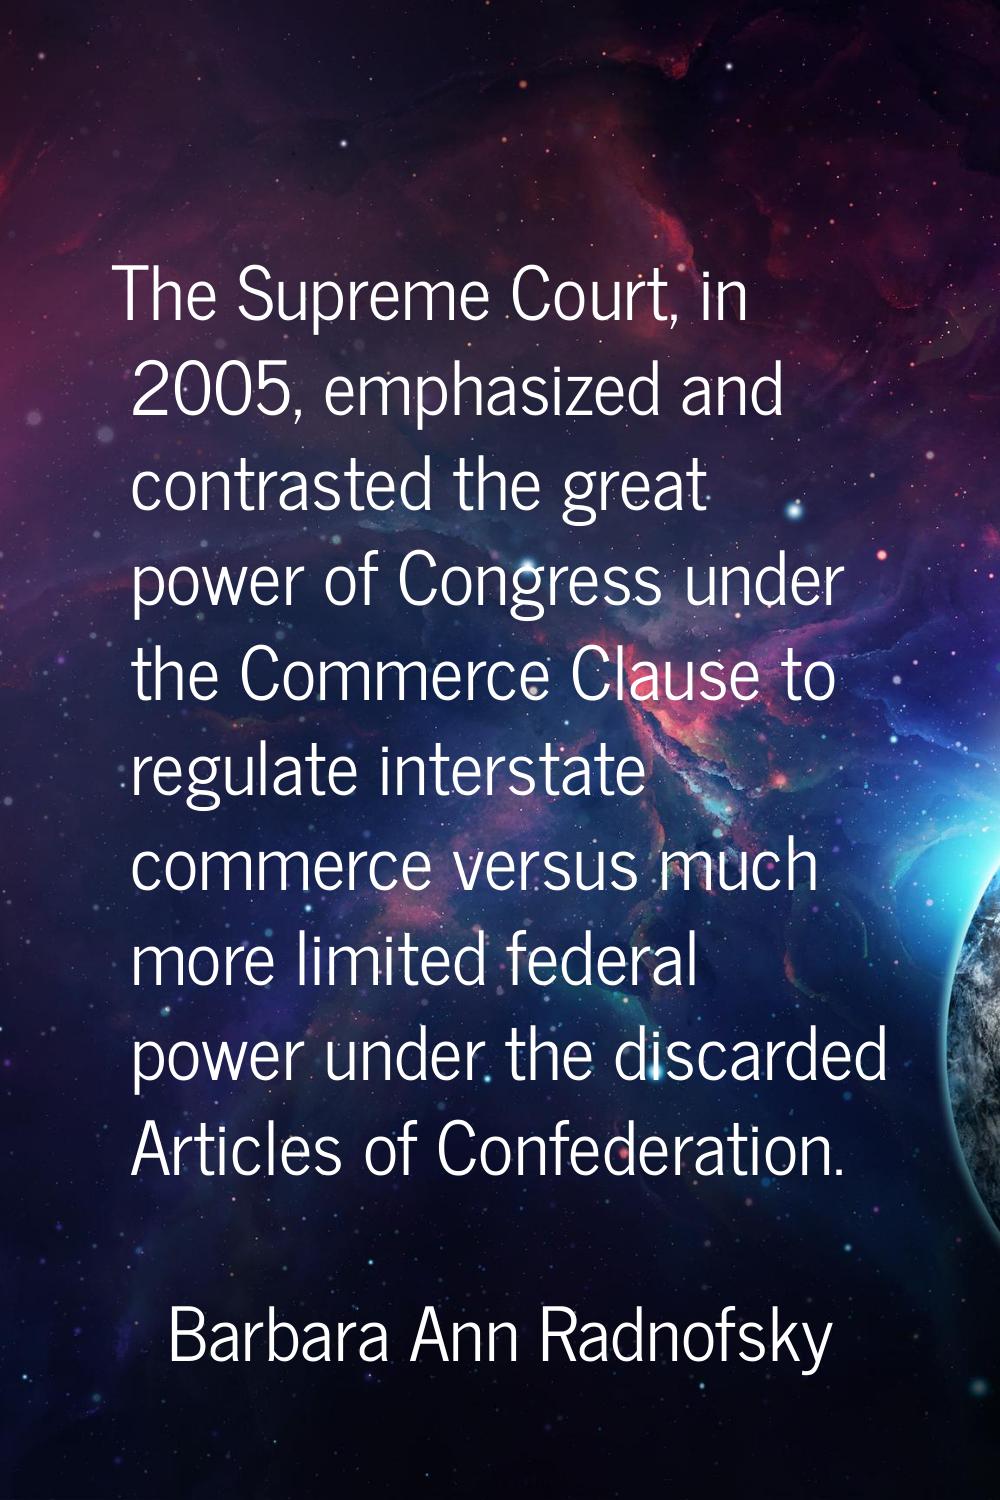 The Supreme Court, in 2005, emphasized and contrasted the great power of Congress under the Commerc